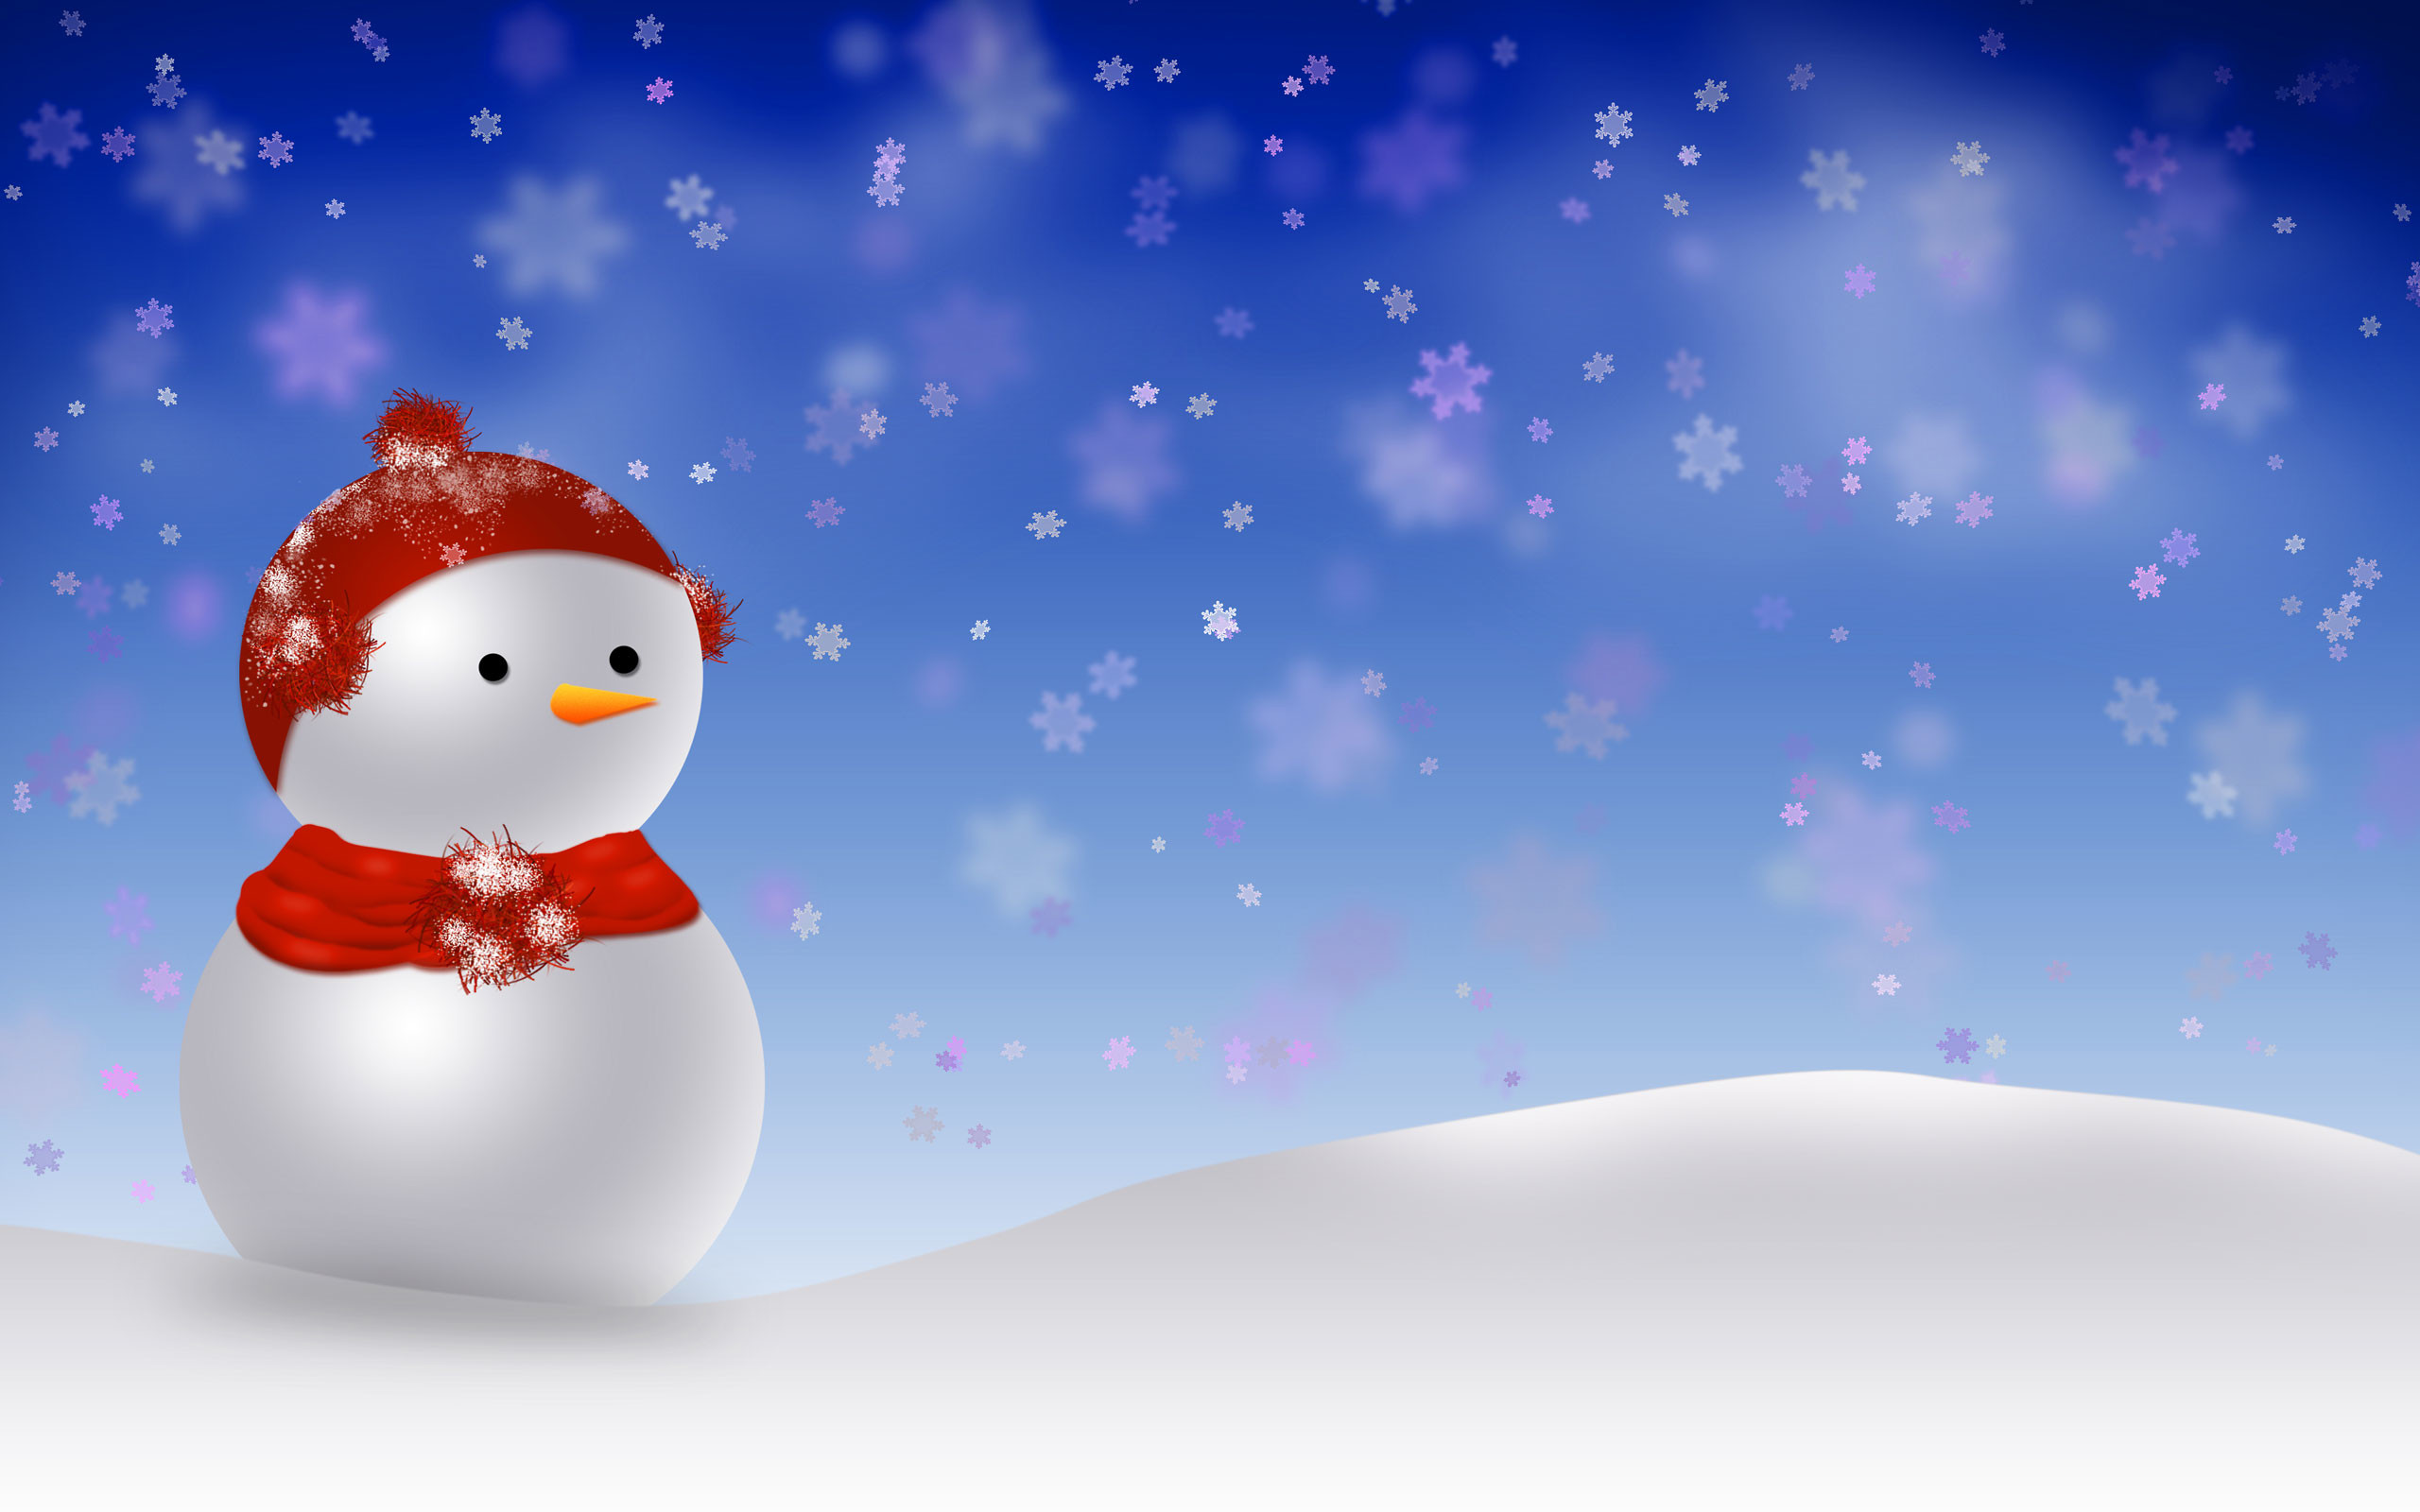 42+ Snowman Screensavers and Wallpapers